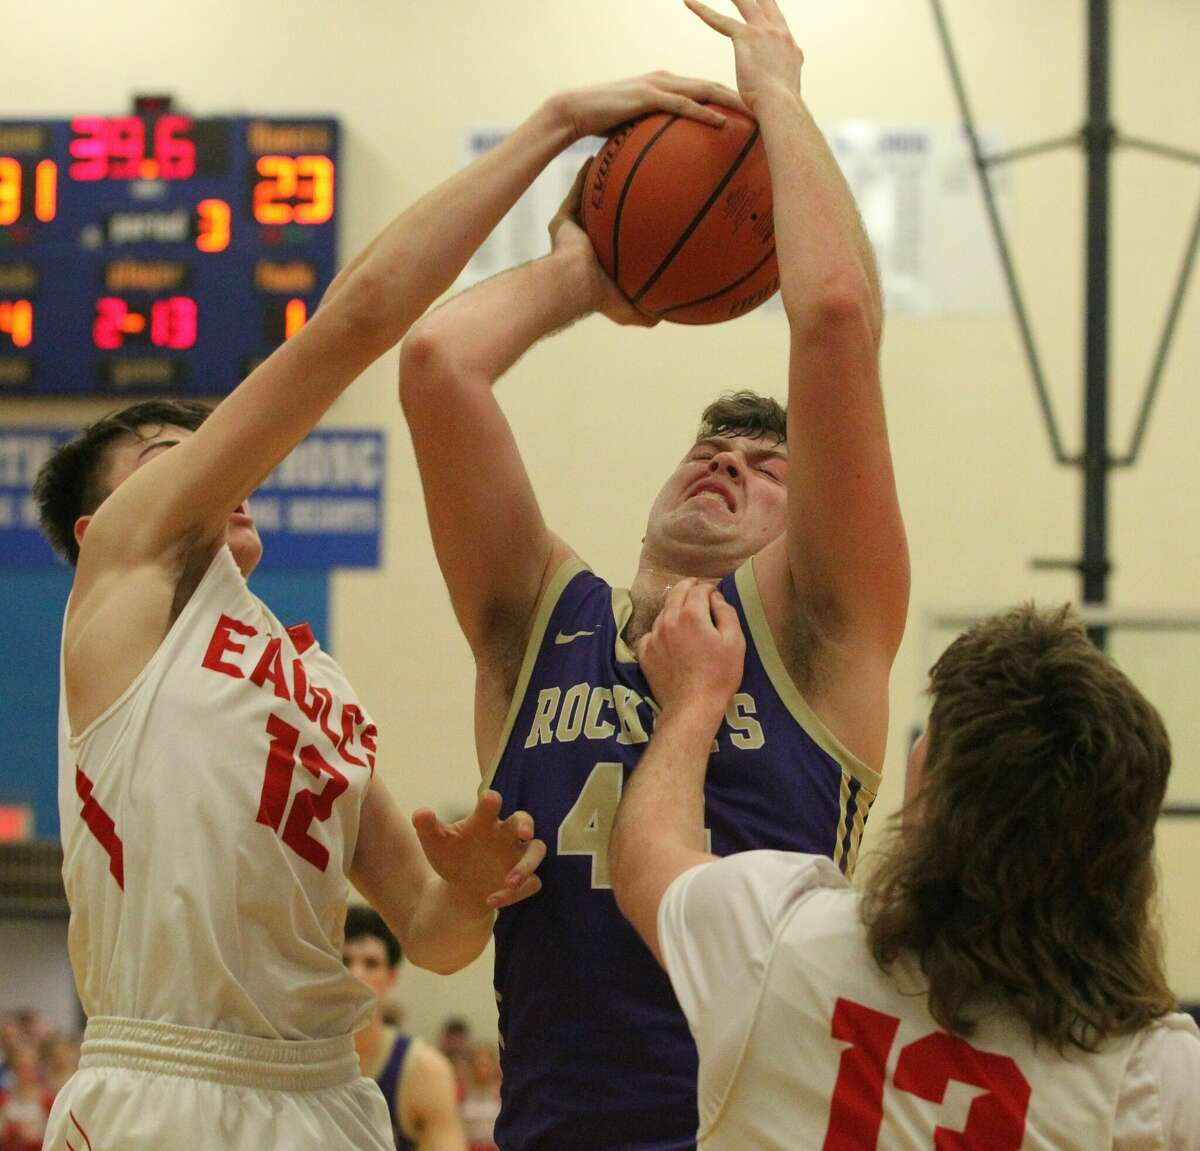 Routt's Gus Abell puts up a shot against Liberty in the championship game of the North Greene Sectional Friday night in White Hall.